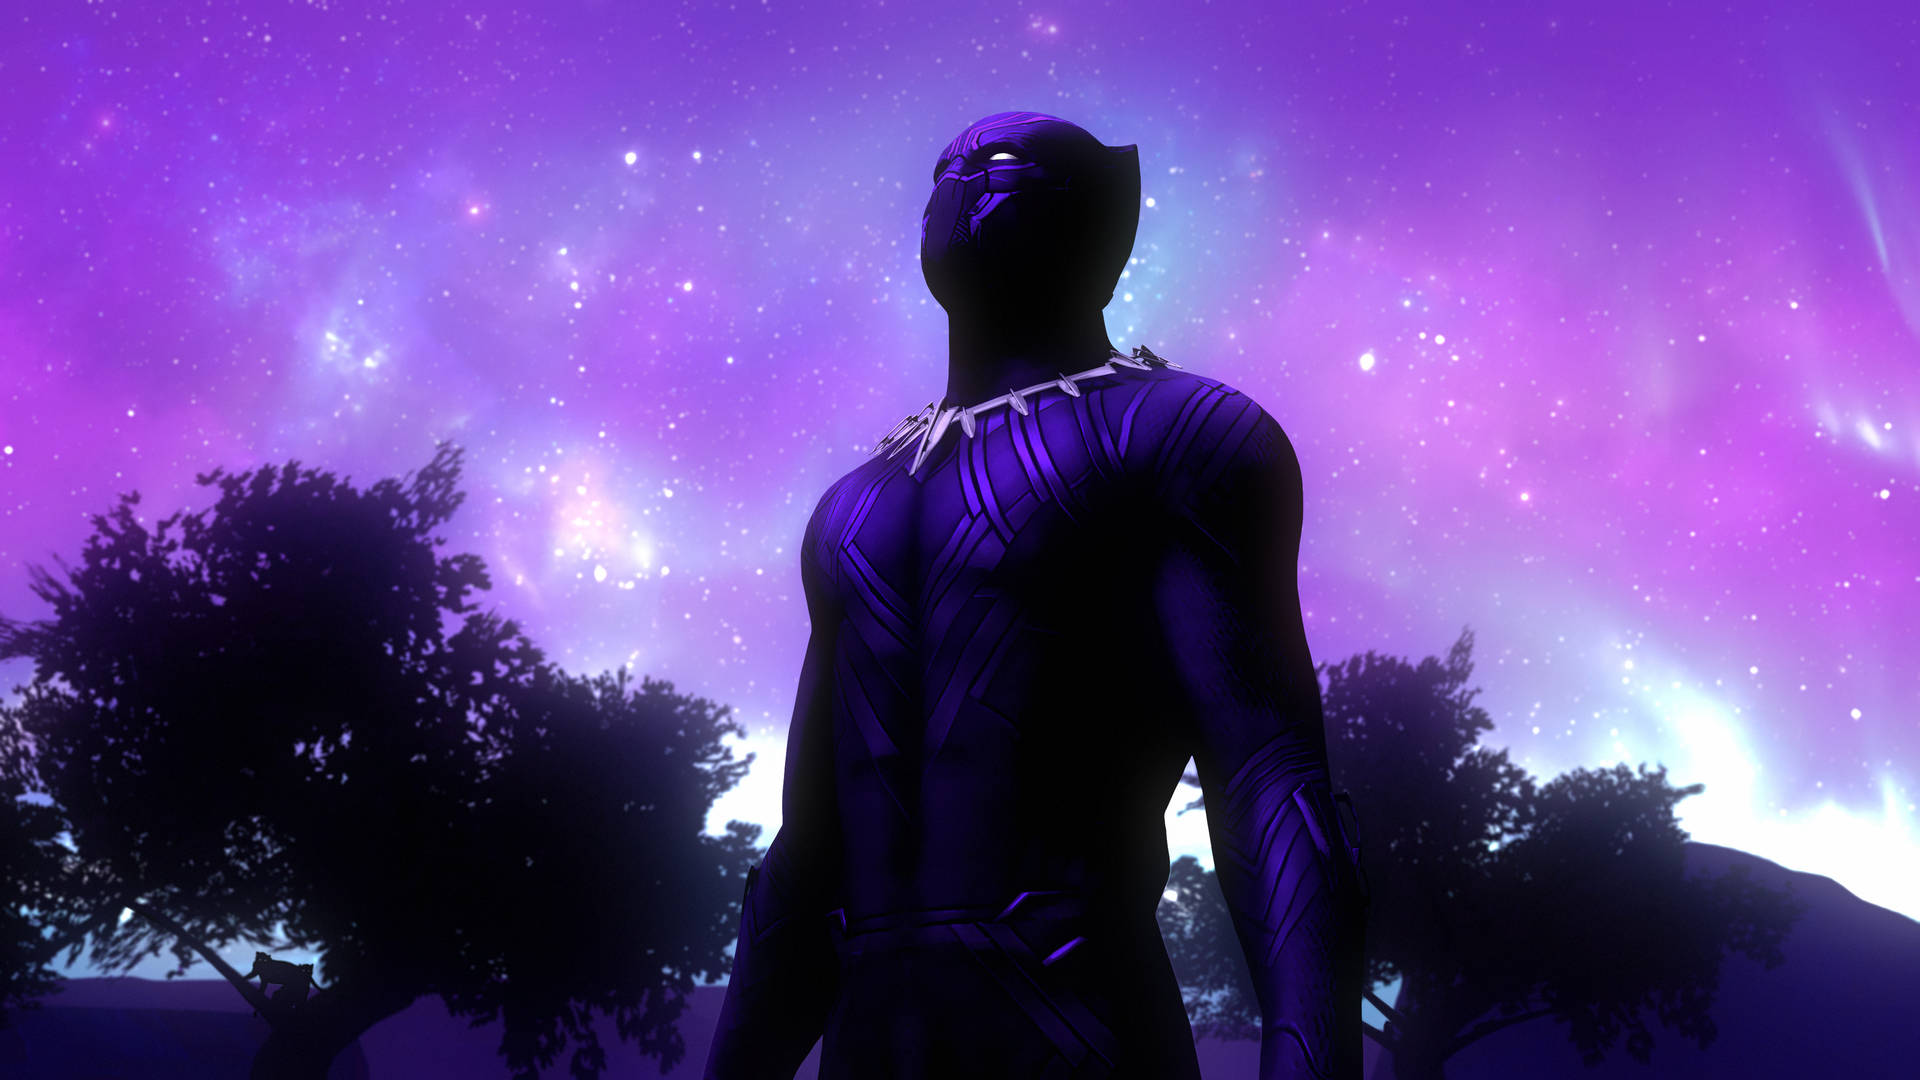 Aesthetic Black Panther 4k Ultra Hd Dark Picture